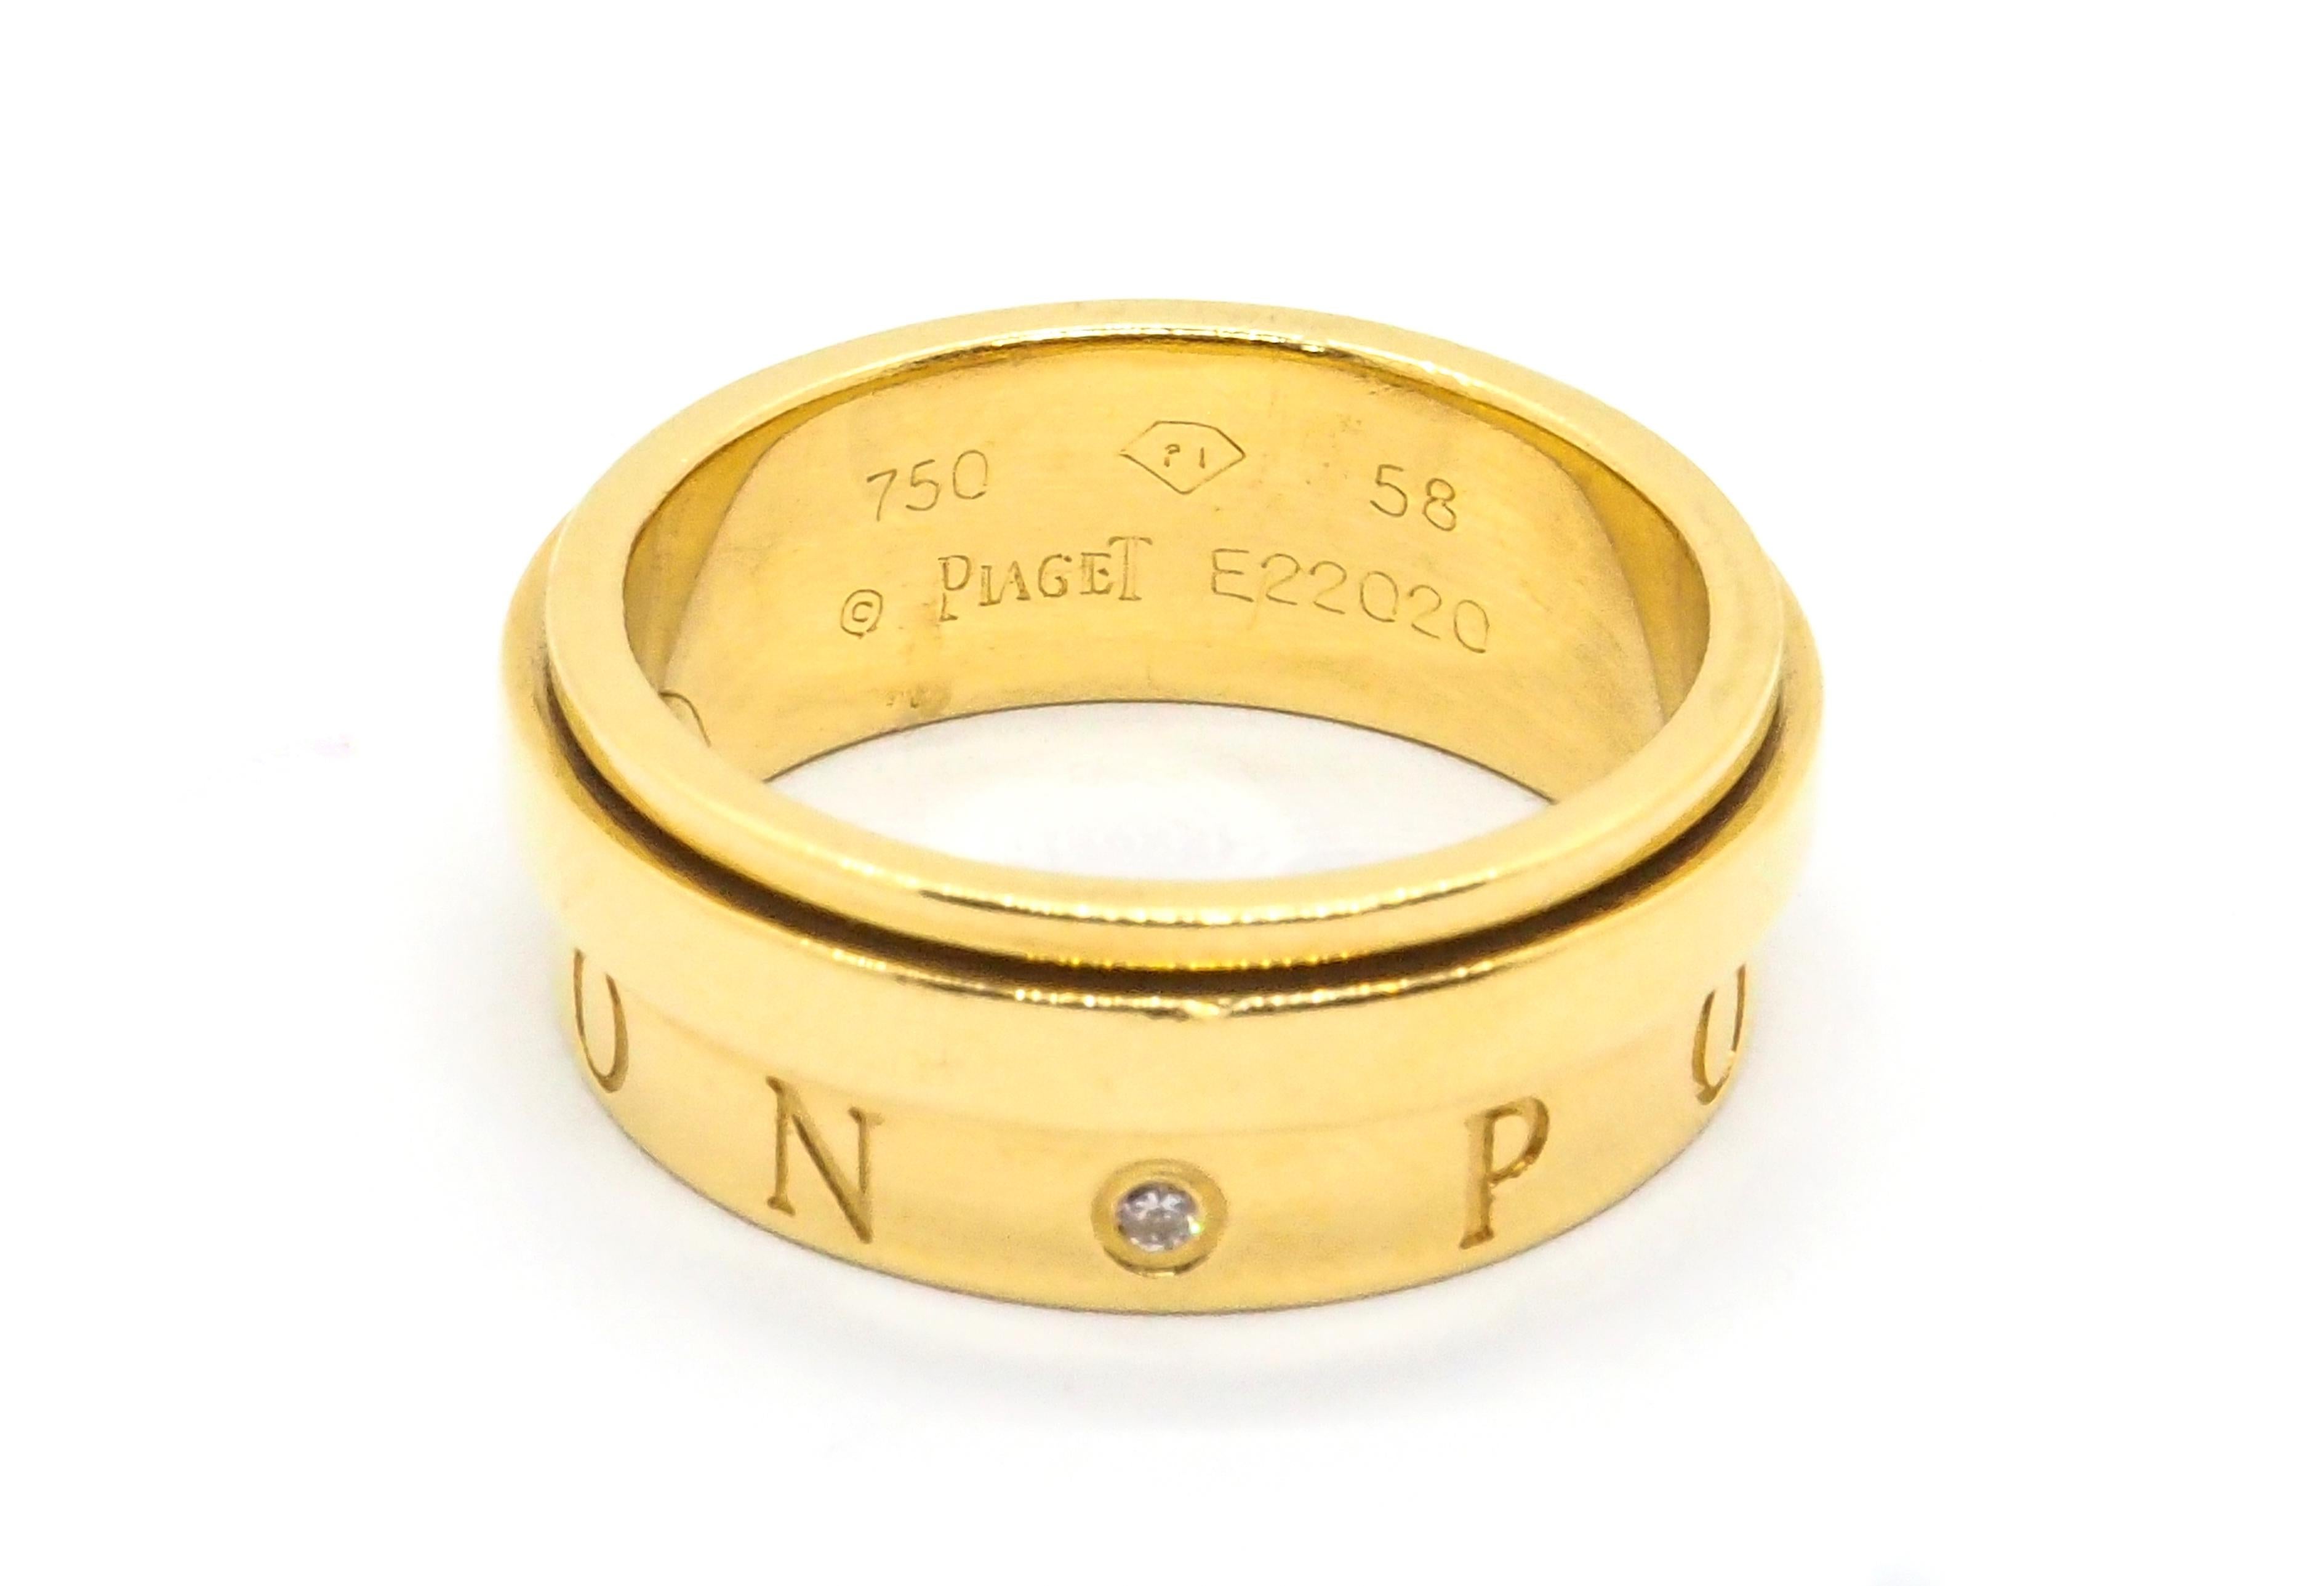 A 18k yellow gold Piaget Possession eccentric ring comprised of a plain band positioned to the upper edge set with one single diamond, which moves freely in a perpetual movement. The lower half of the inner band is engraved with the word